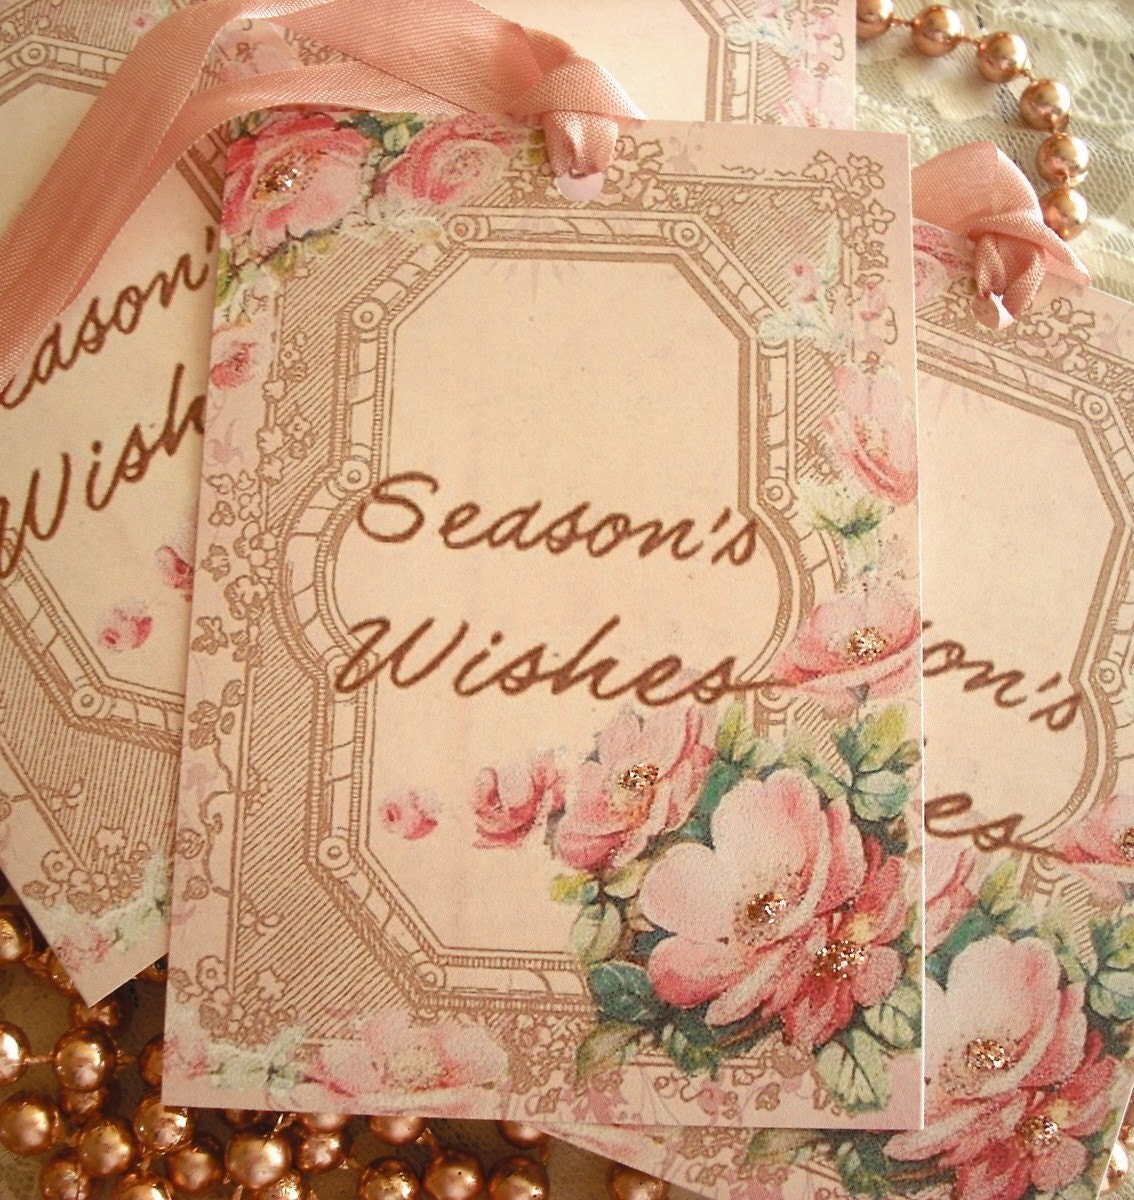 NEW ITEM... VINTAGE INSPIRED PRETTIEST PINK SEASON'S WISHES GIFT TAGS